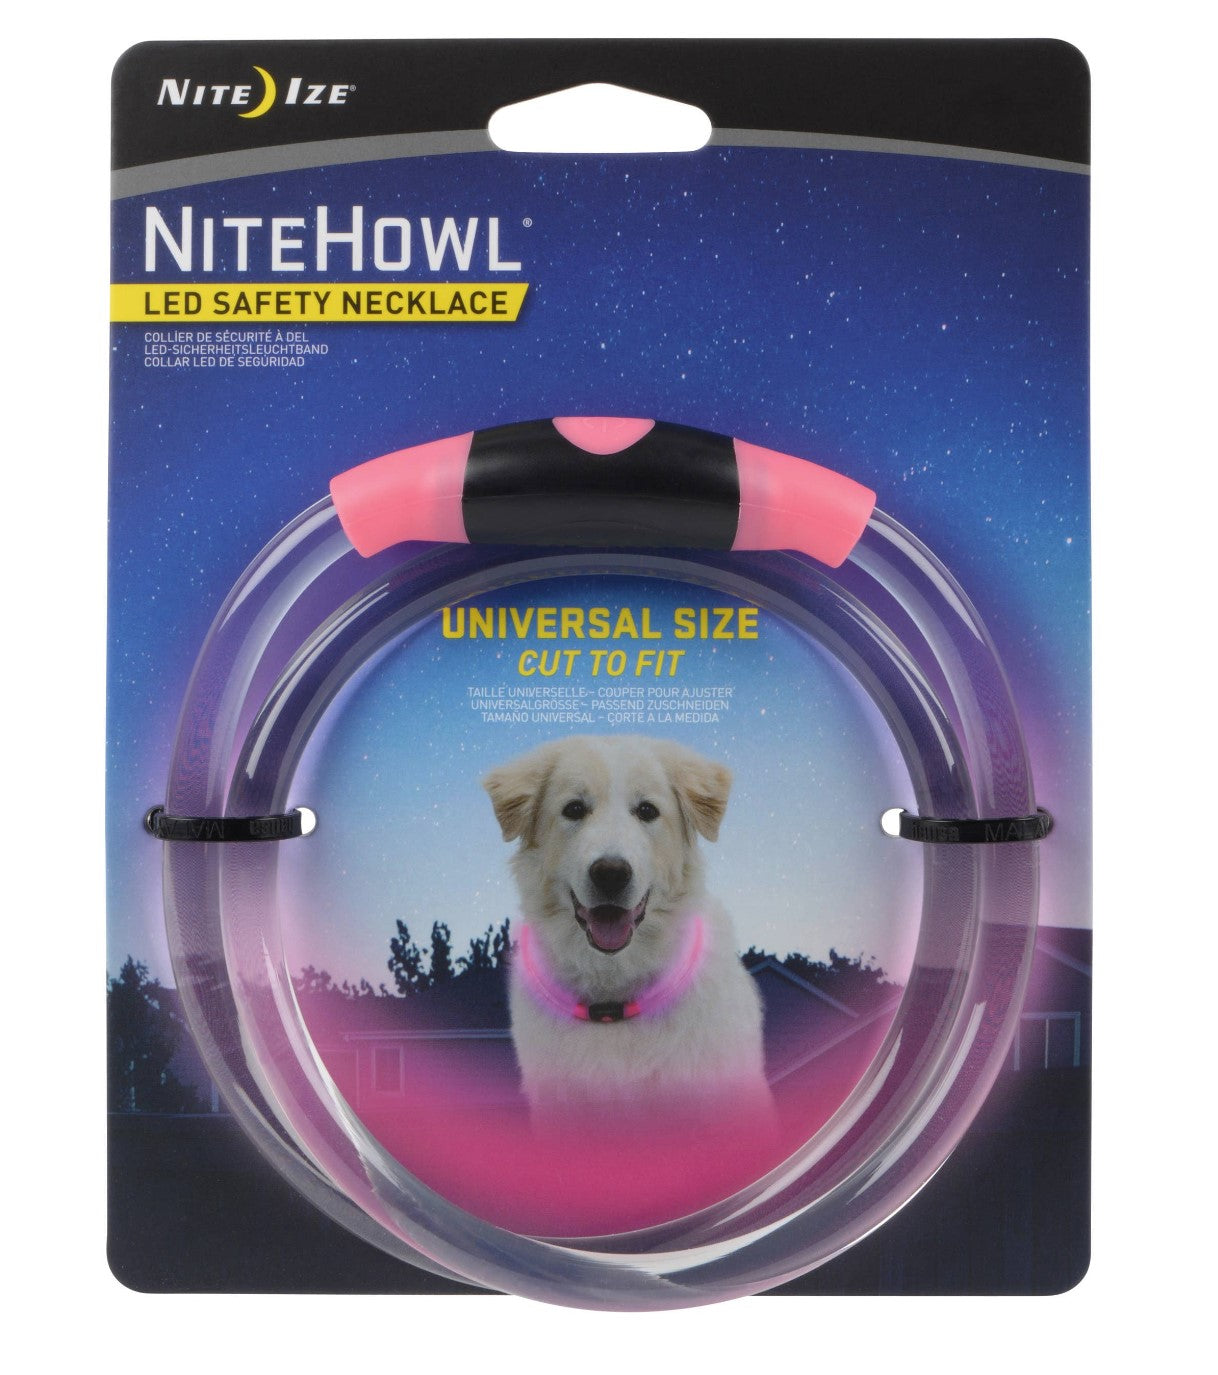 NiteHowl  Battery operated LED Safety Necklace